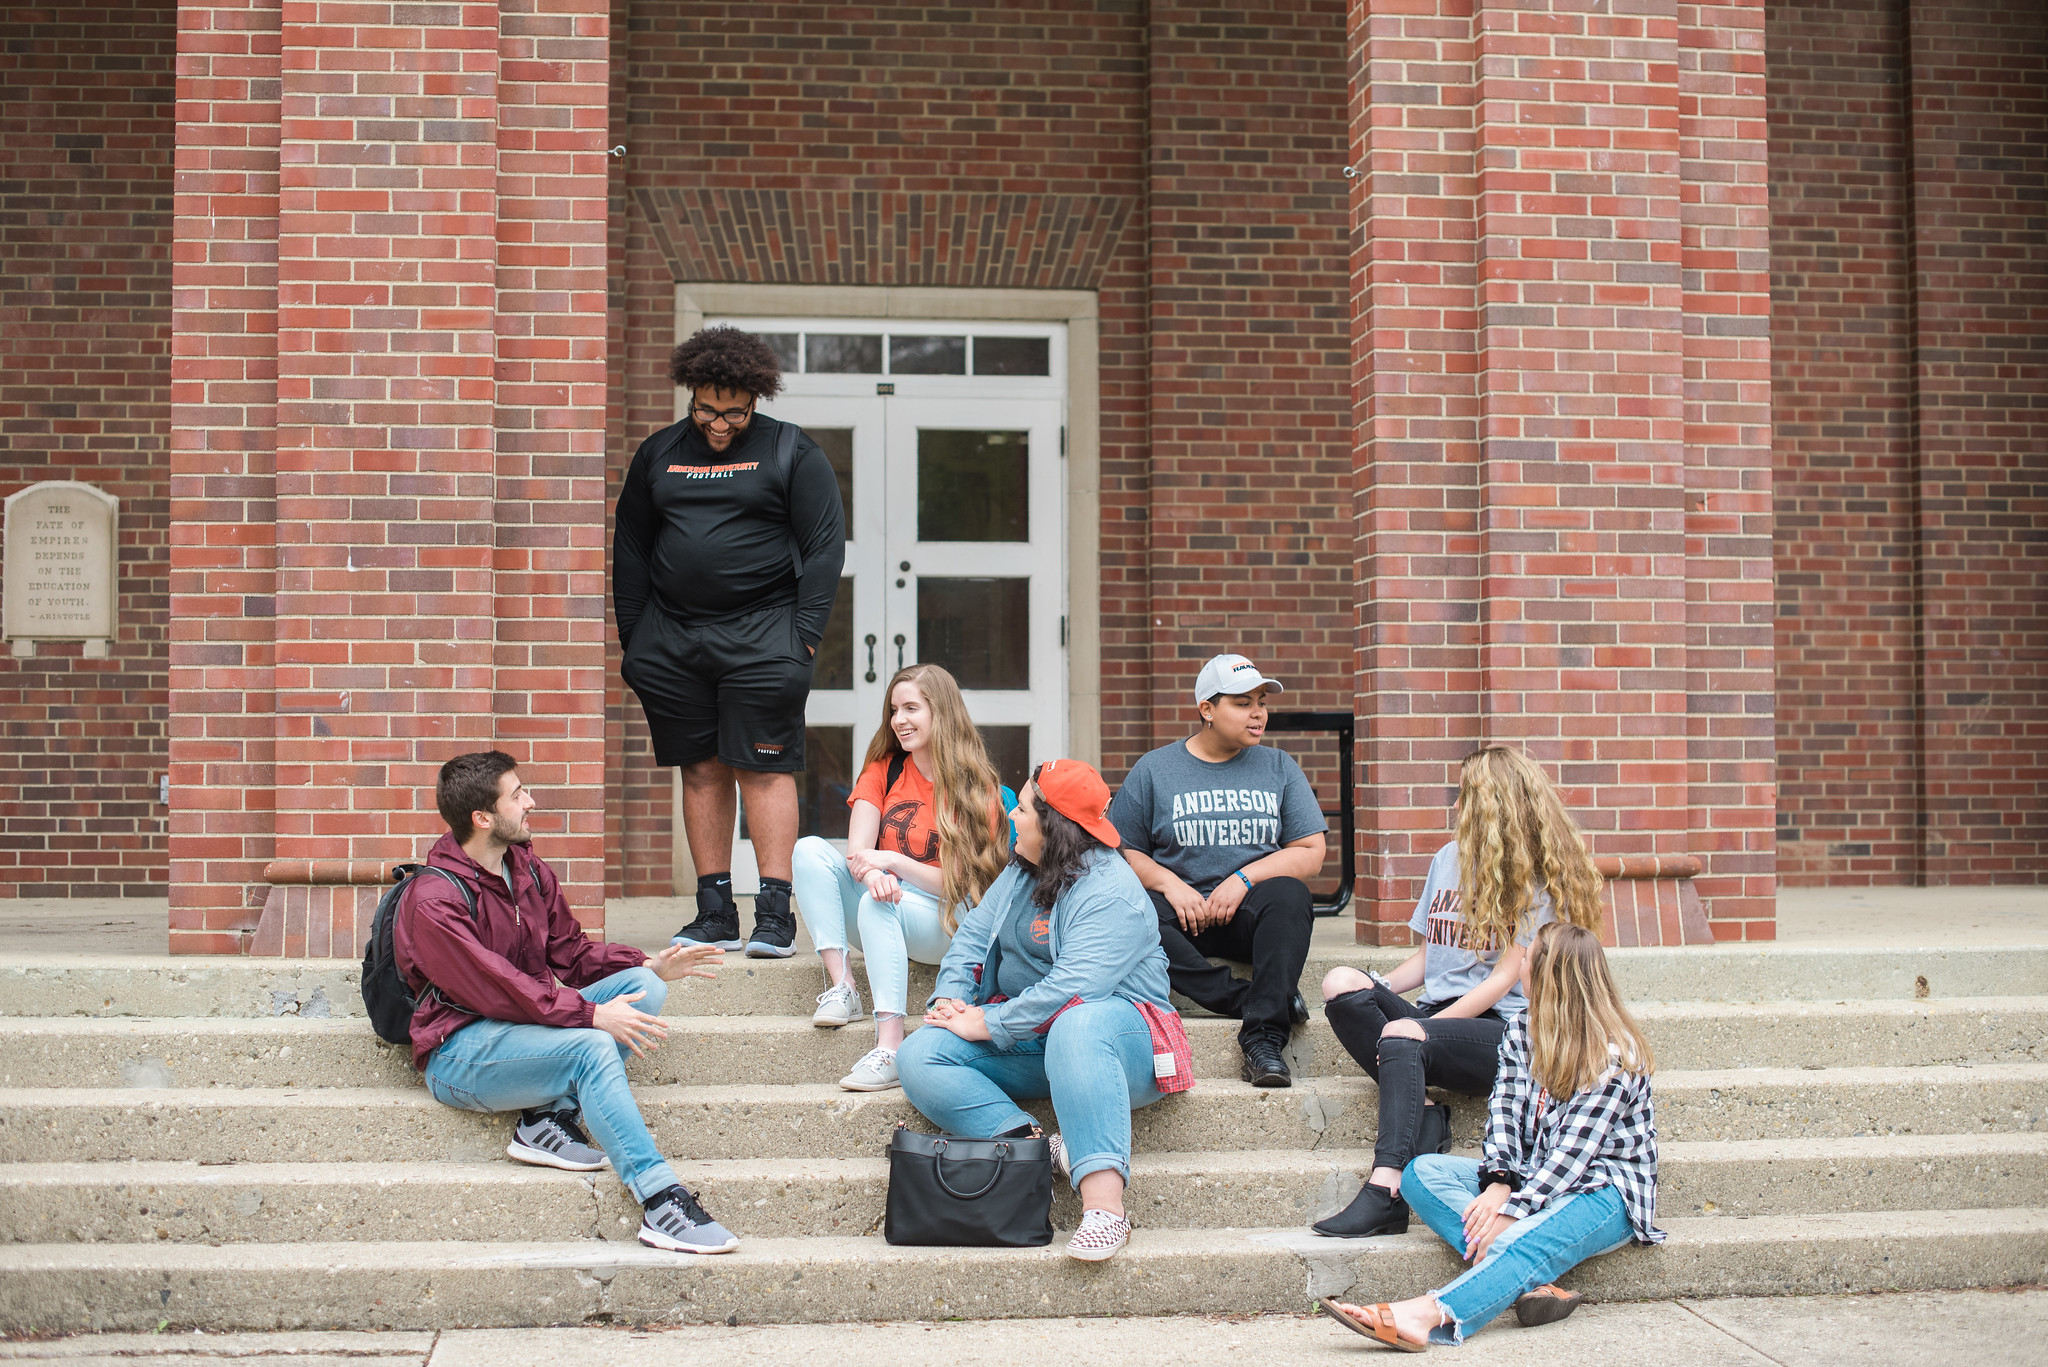 Seven students sitting outside on steps on the Anderson University campus